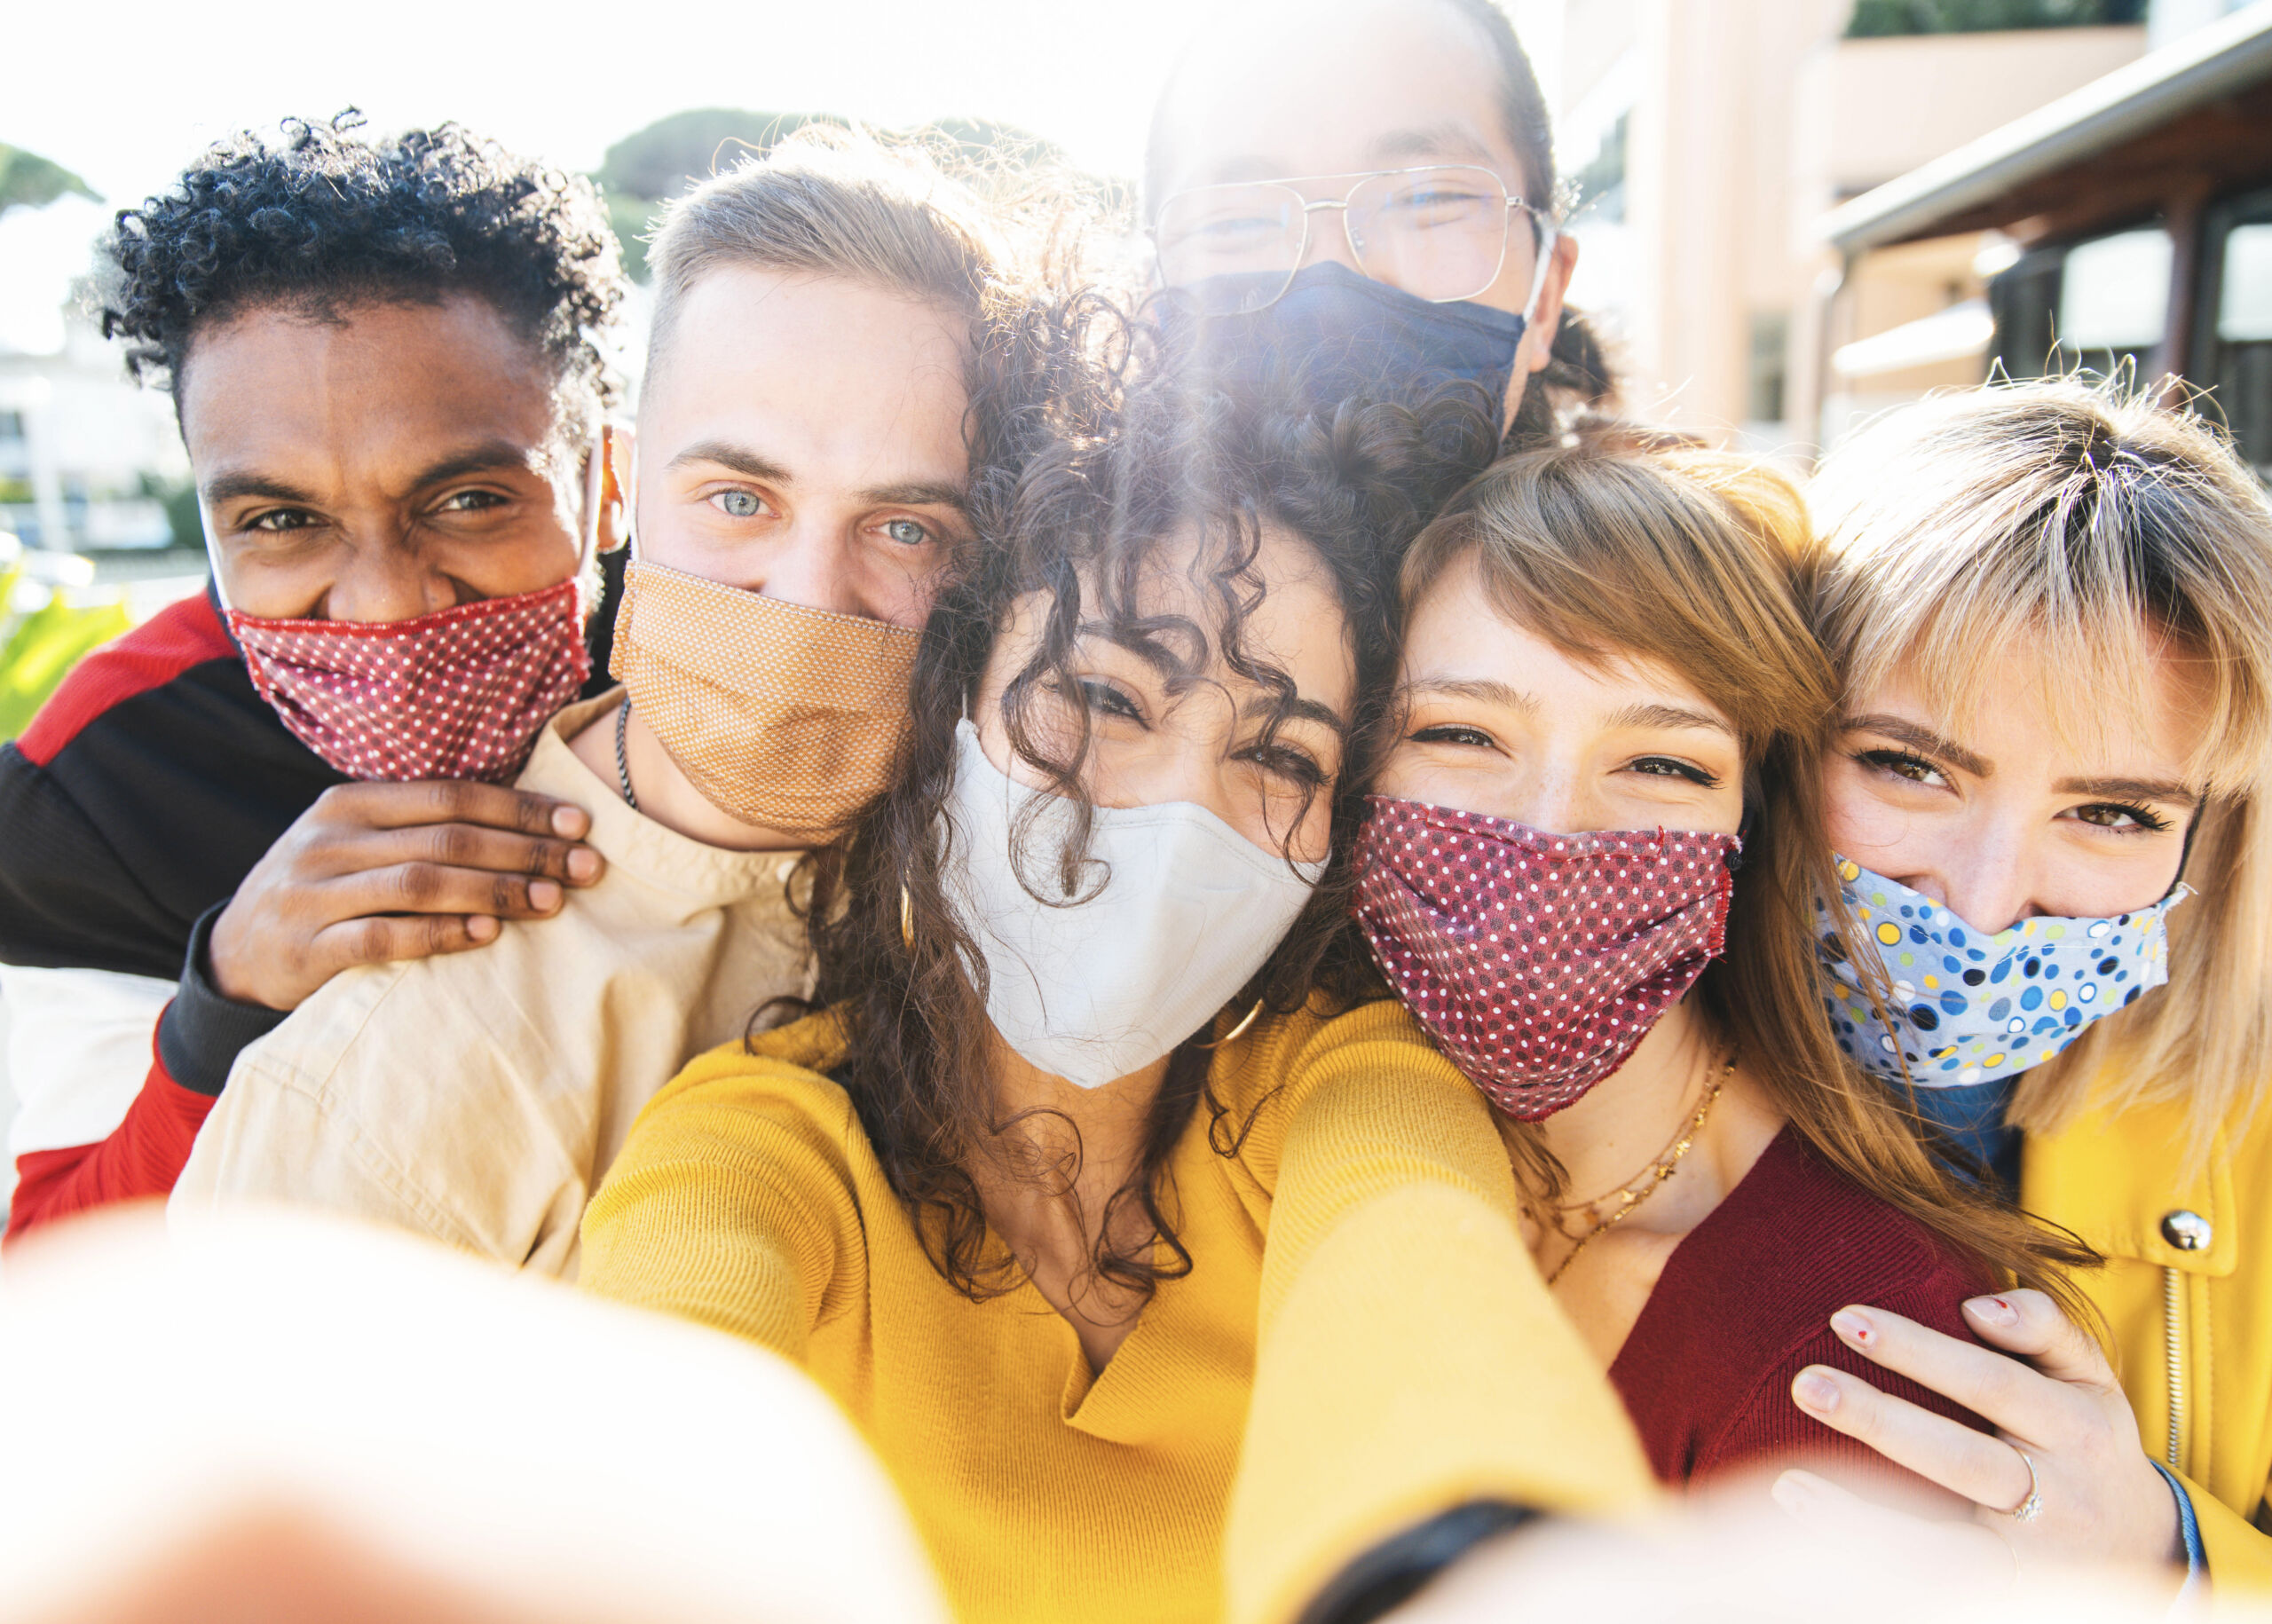 multicultural friends covered by face masks taking a selfie outdoor new normal friendship concept with young people smiling and having fun bright filter